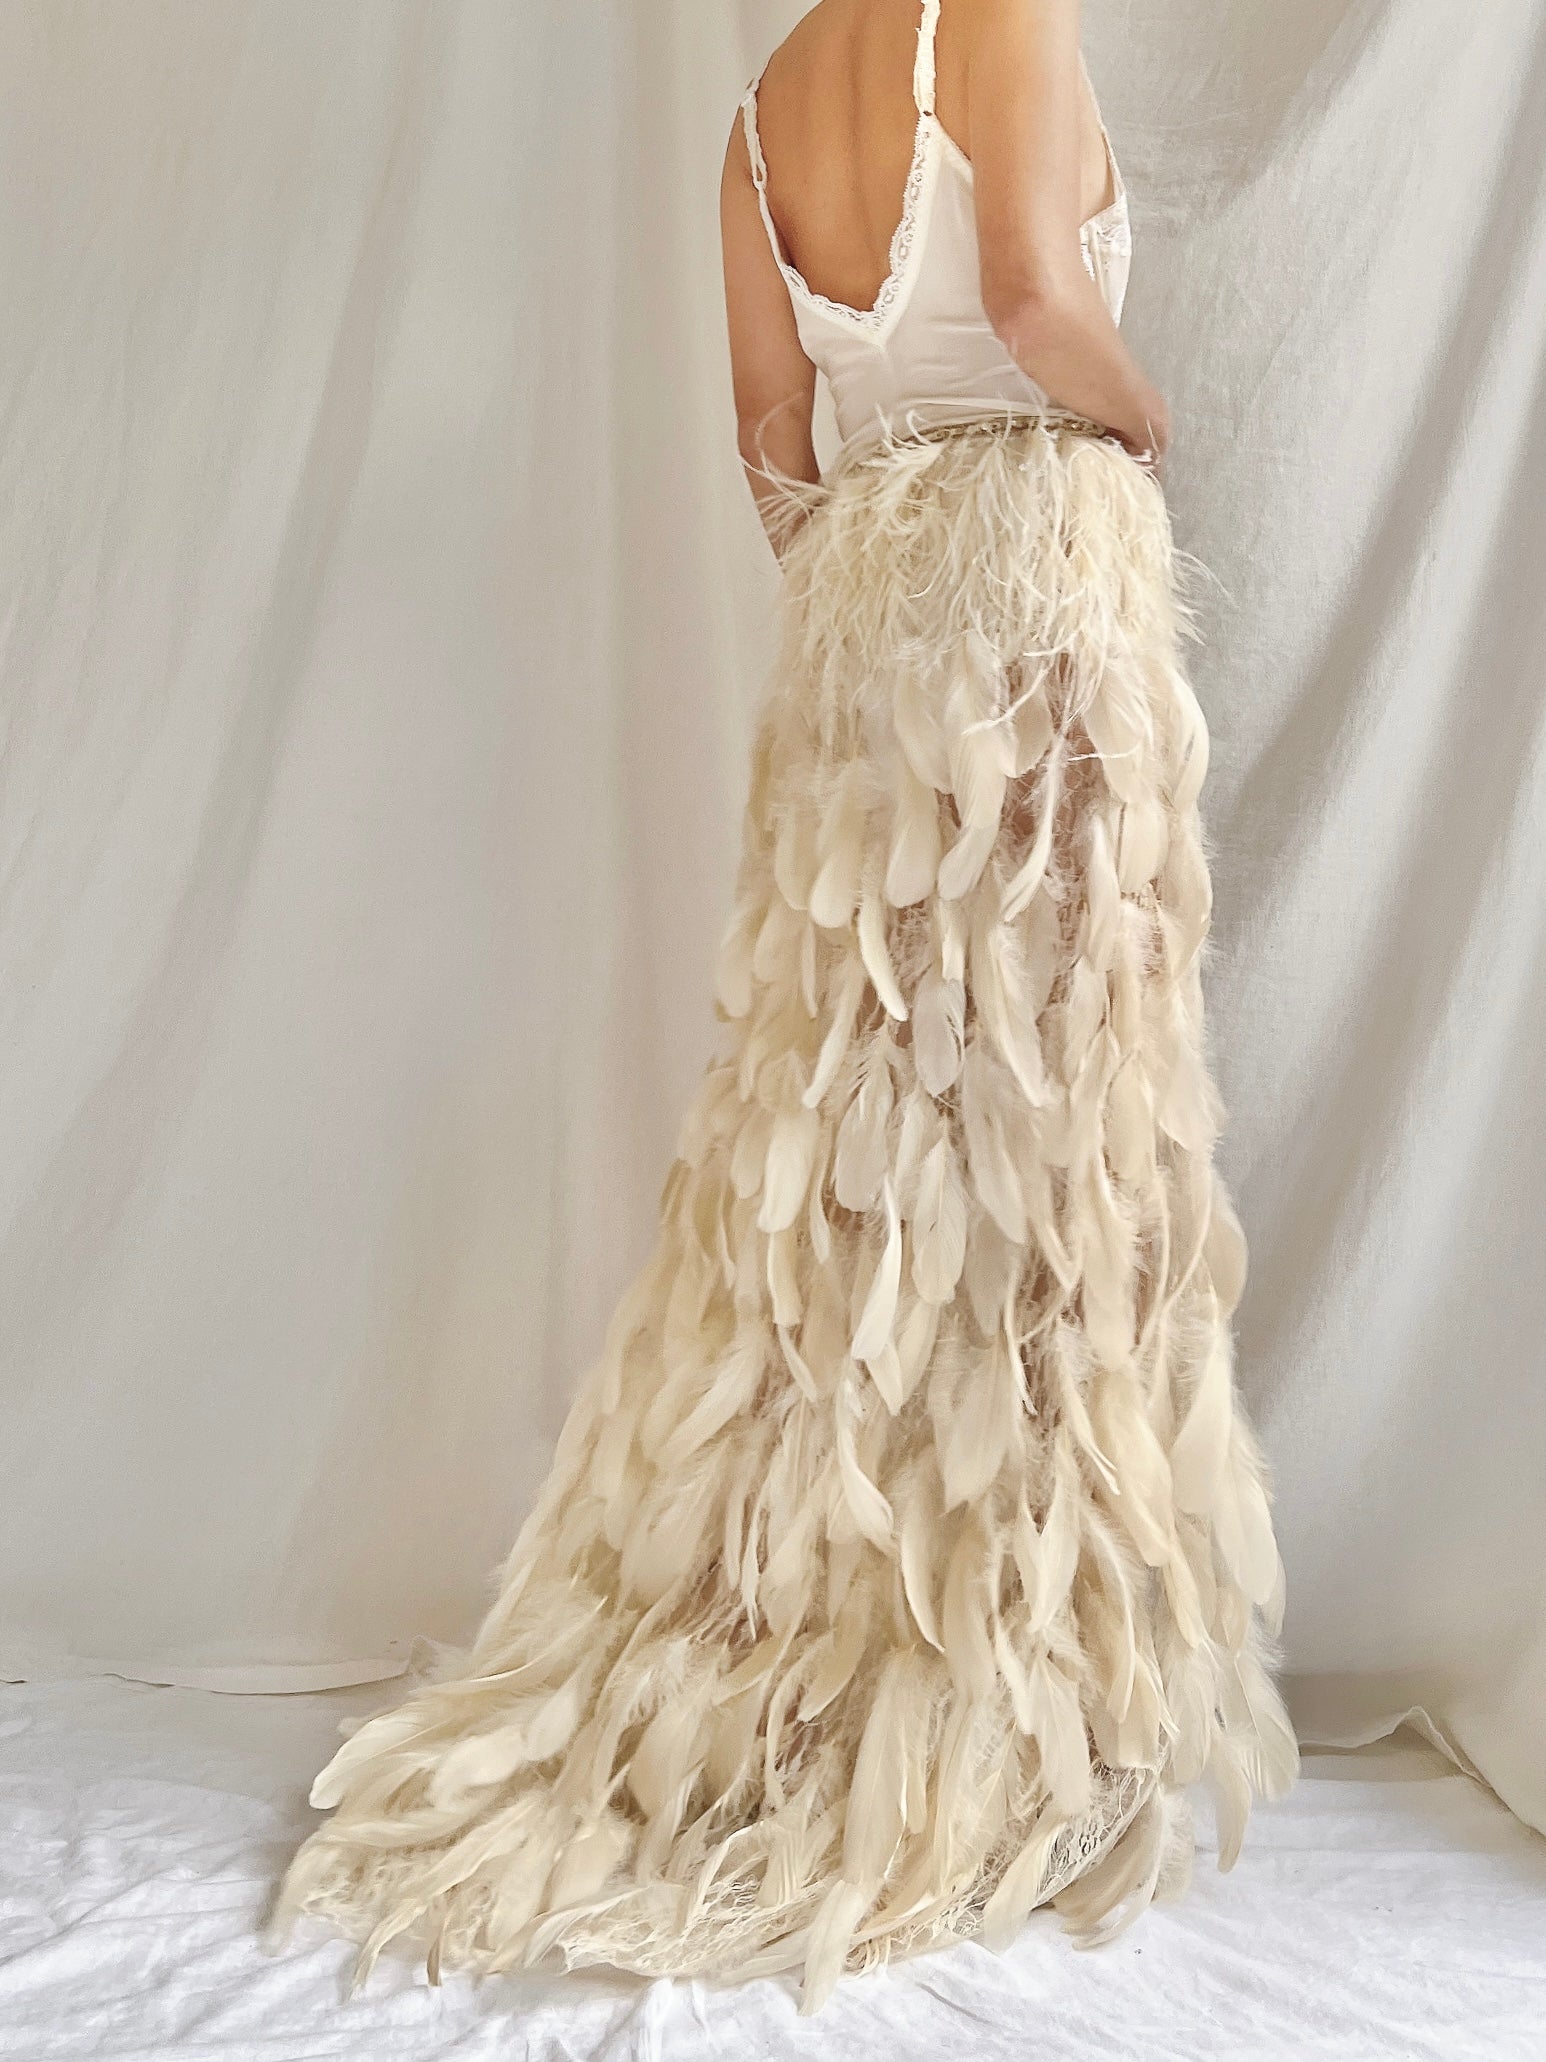 Vintage Buttercream Feather and Lace Skirt - S